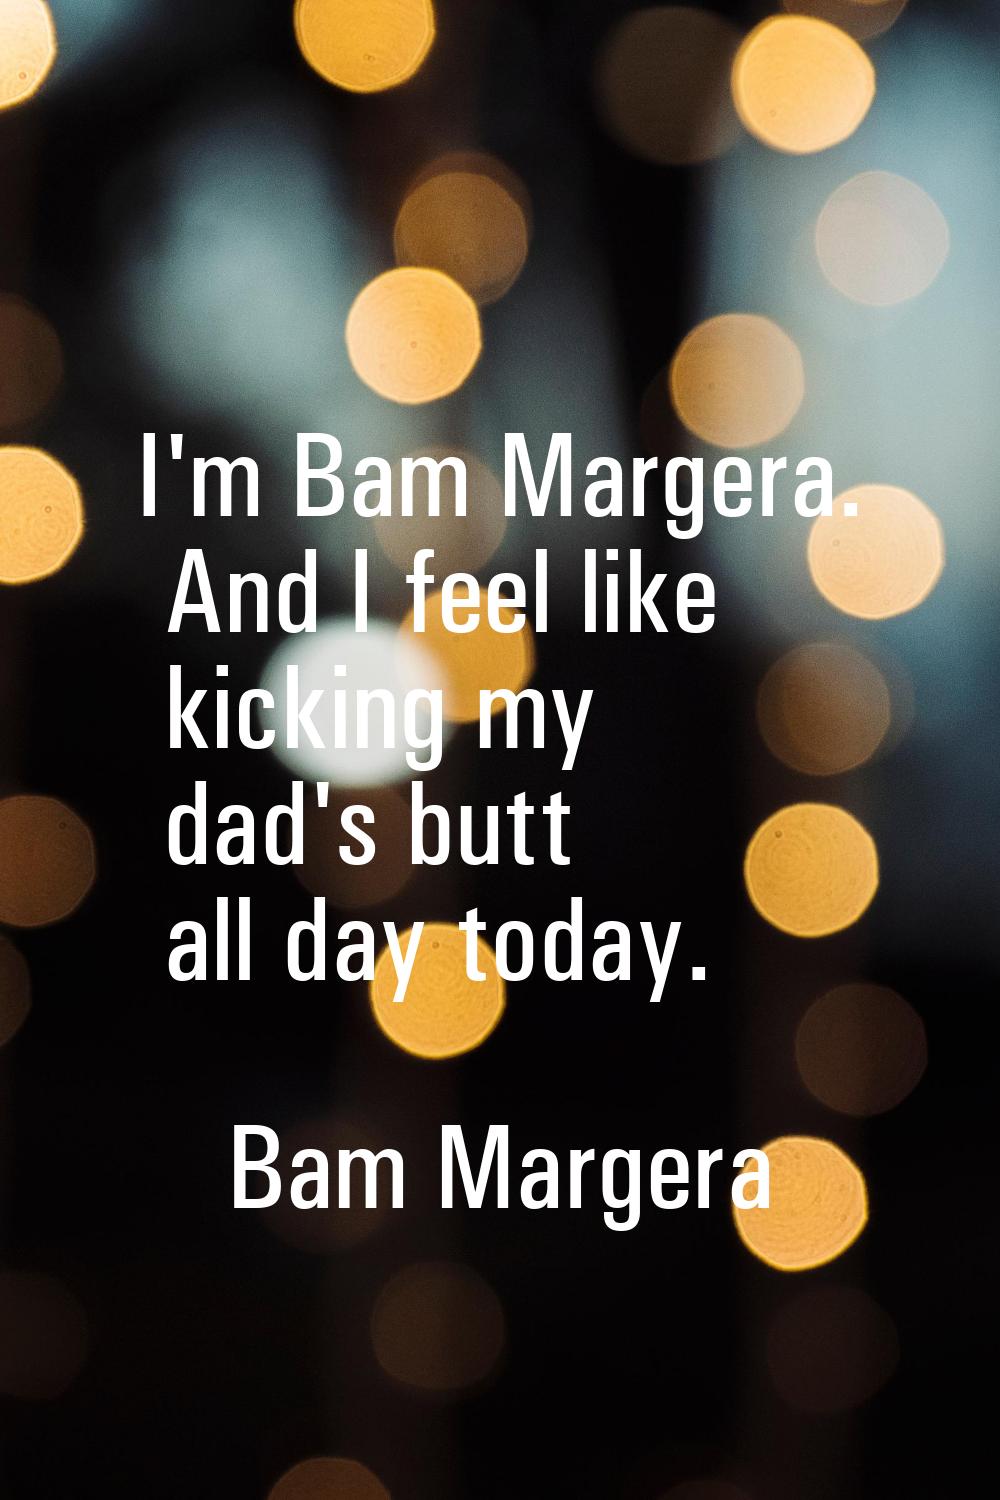 I'm Bam Margera. And I feel like kicking my dad's butt all day today.